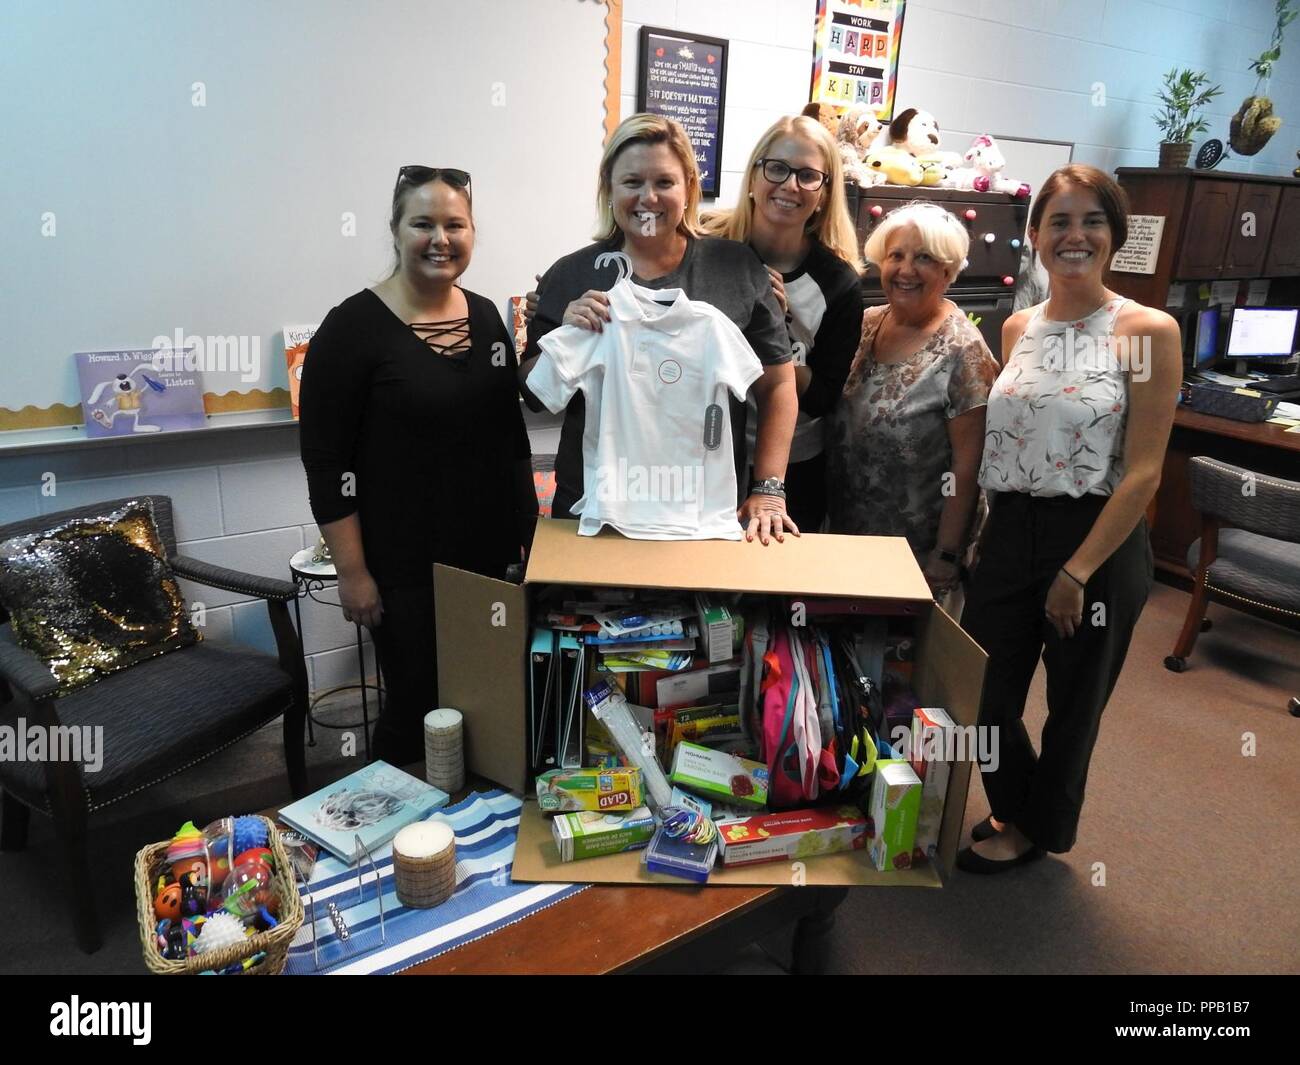 PANAMA CITY, Florida - Deniece Moss (center), principal at West Bay Elementary School poses with employees of Naval Surface Warfare Center Panama City Division’s (NSWC PCD) Test and Evaluation Prototype Fabrication Division. The group collected needed school supplies for Bay District School students in Panama City Beach, Florida August 13, 2018. Pictured from left to right: Nicole Waters, Deniece Moss, Michelle Armistead, Paula Oliver, and Halie Cameron. U.S. Navy Stock Photo